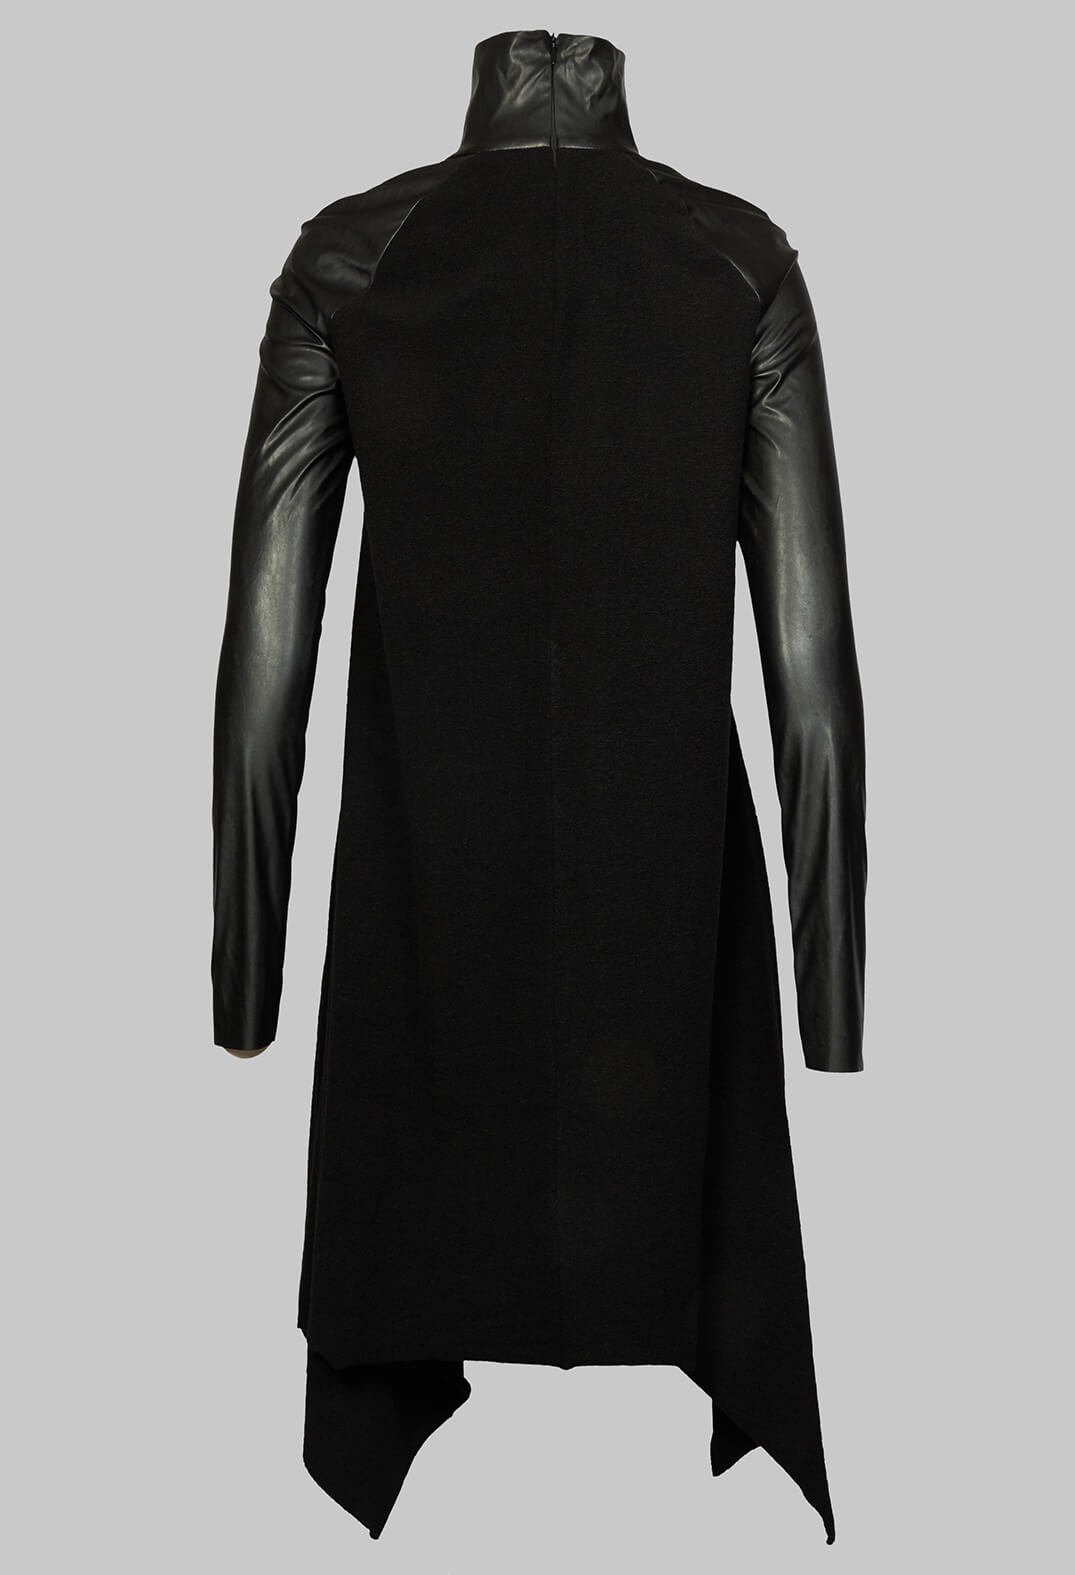 Asymmetric Dress with Contrasting Sleeves in Black